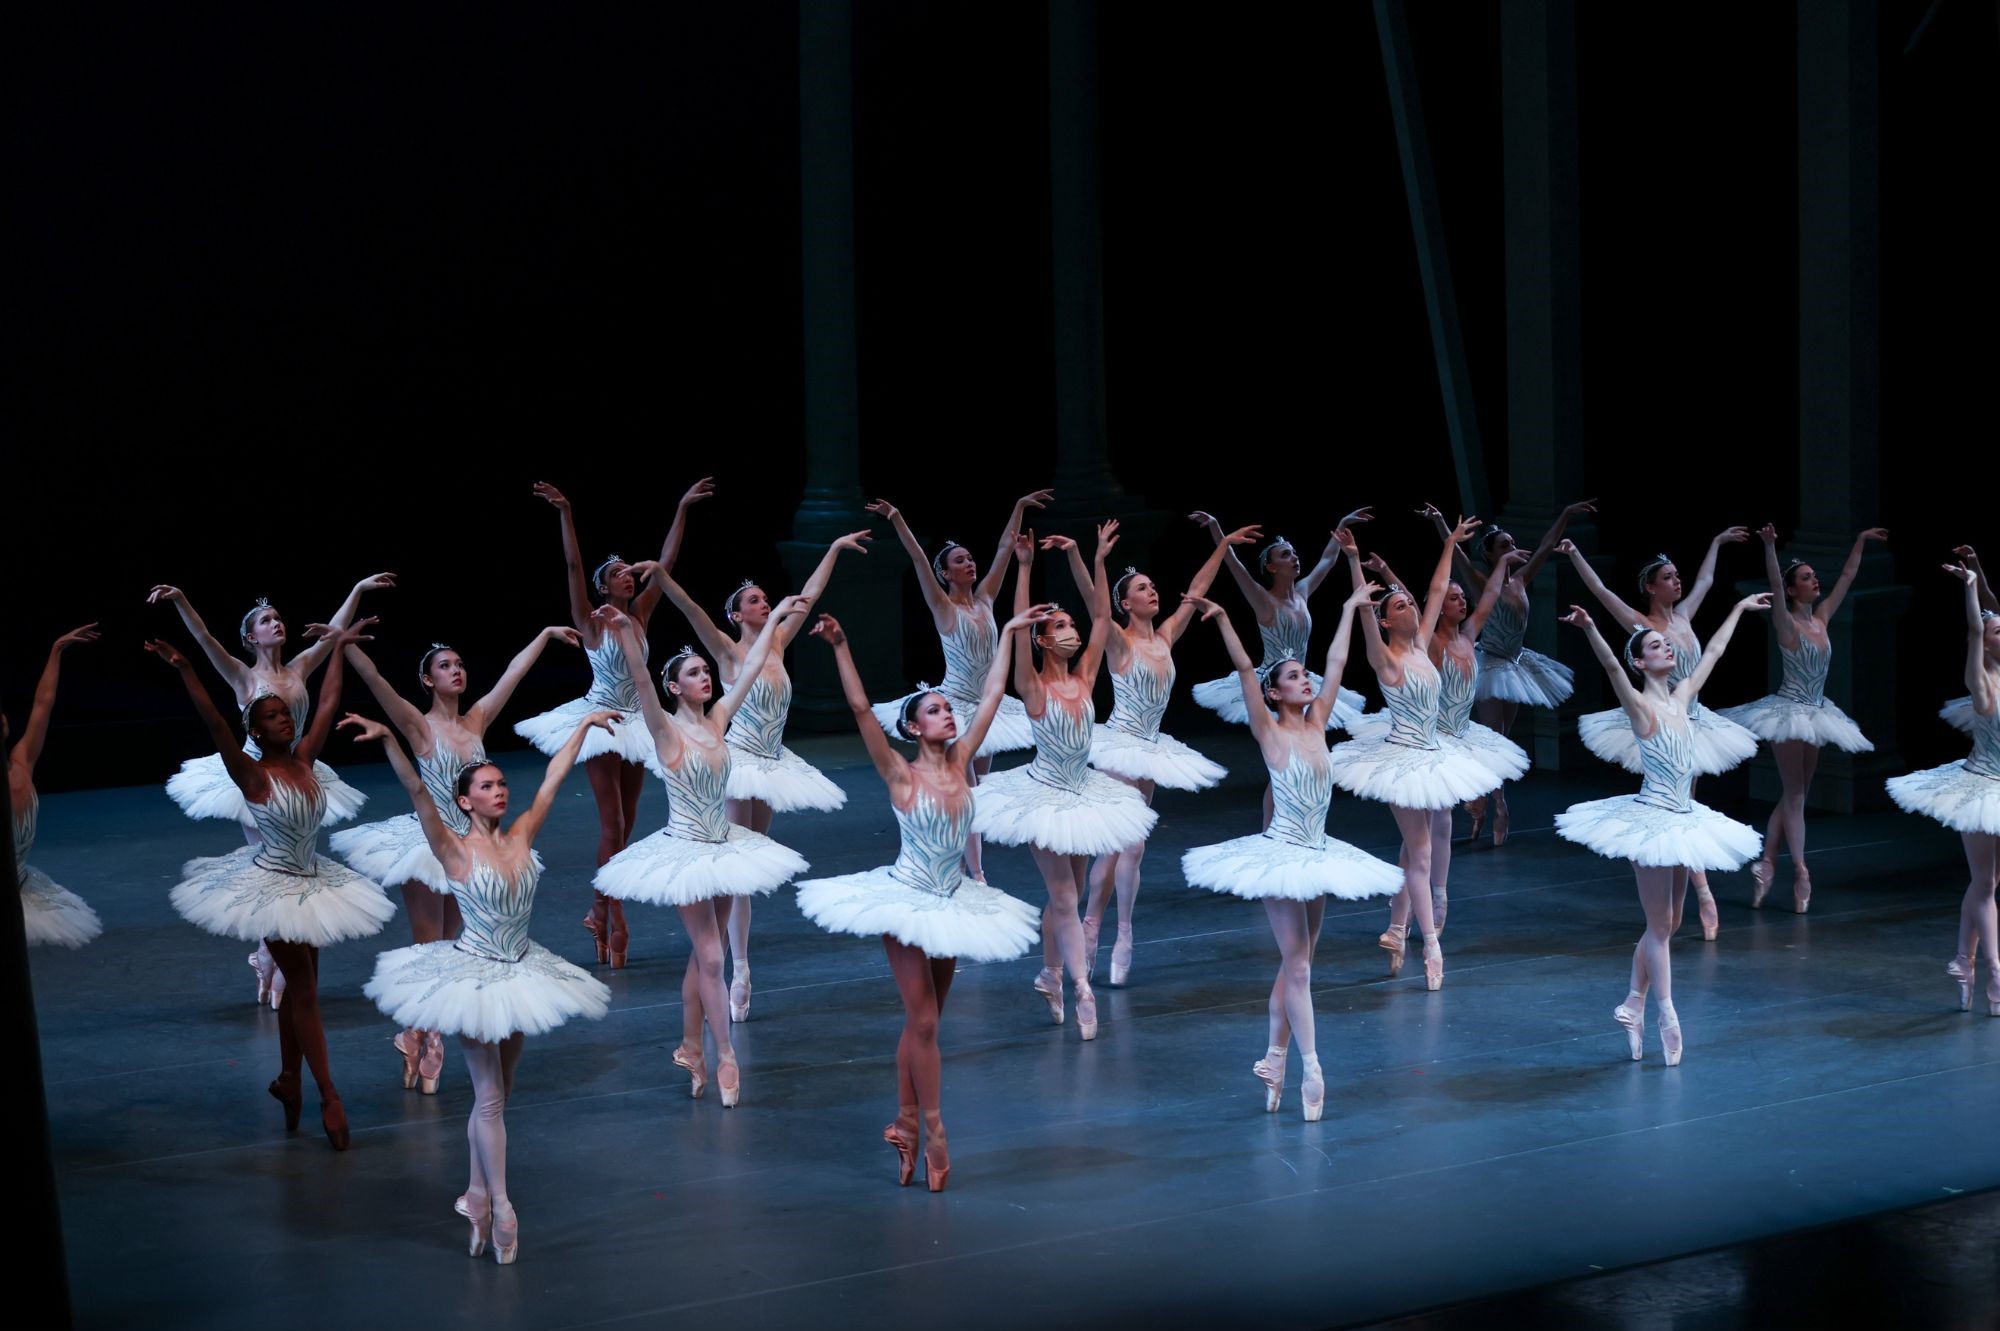 A large group of dancers wearing white tutus stand in rows on a darkly lit stage. They are looking up towards the sky with arms reaching up.